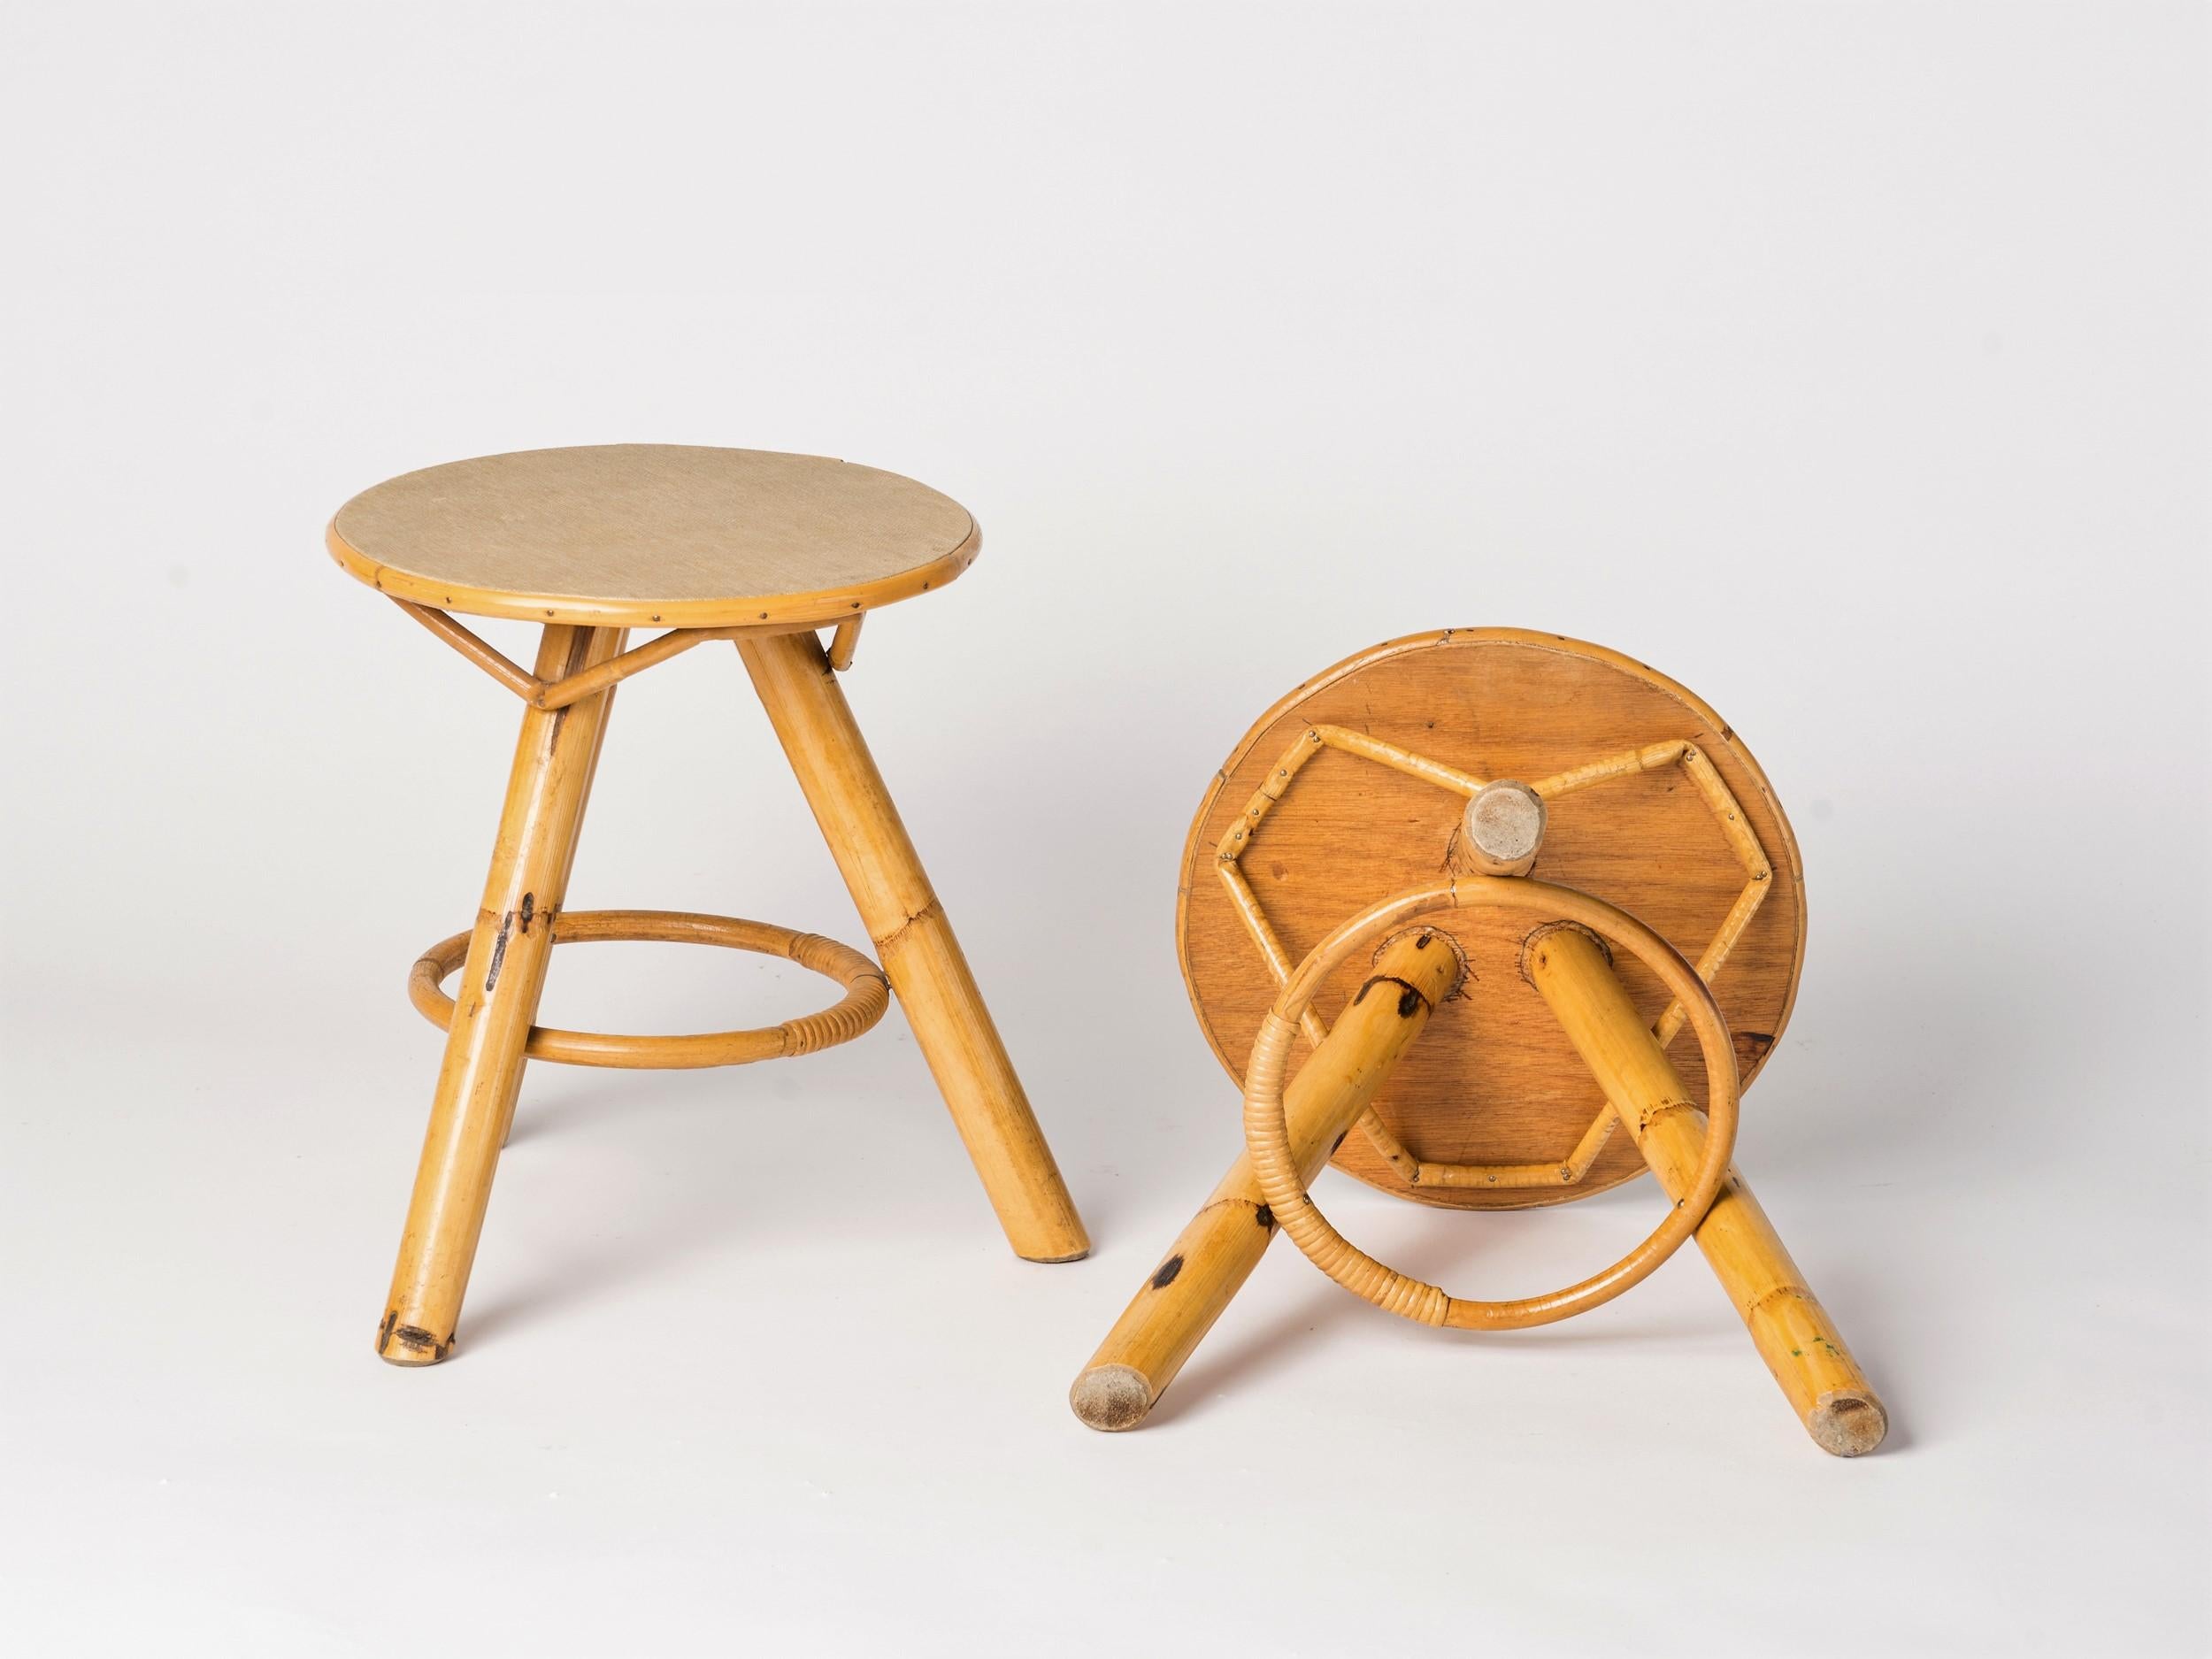 Pair of tripod gueridons in bamboo and vinyl covered top. A third identical gueridons is available. Sturdy and in good vintage condition. These gueridons will ship from France and can be returned to either France or to a Long Island City